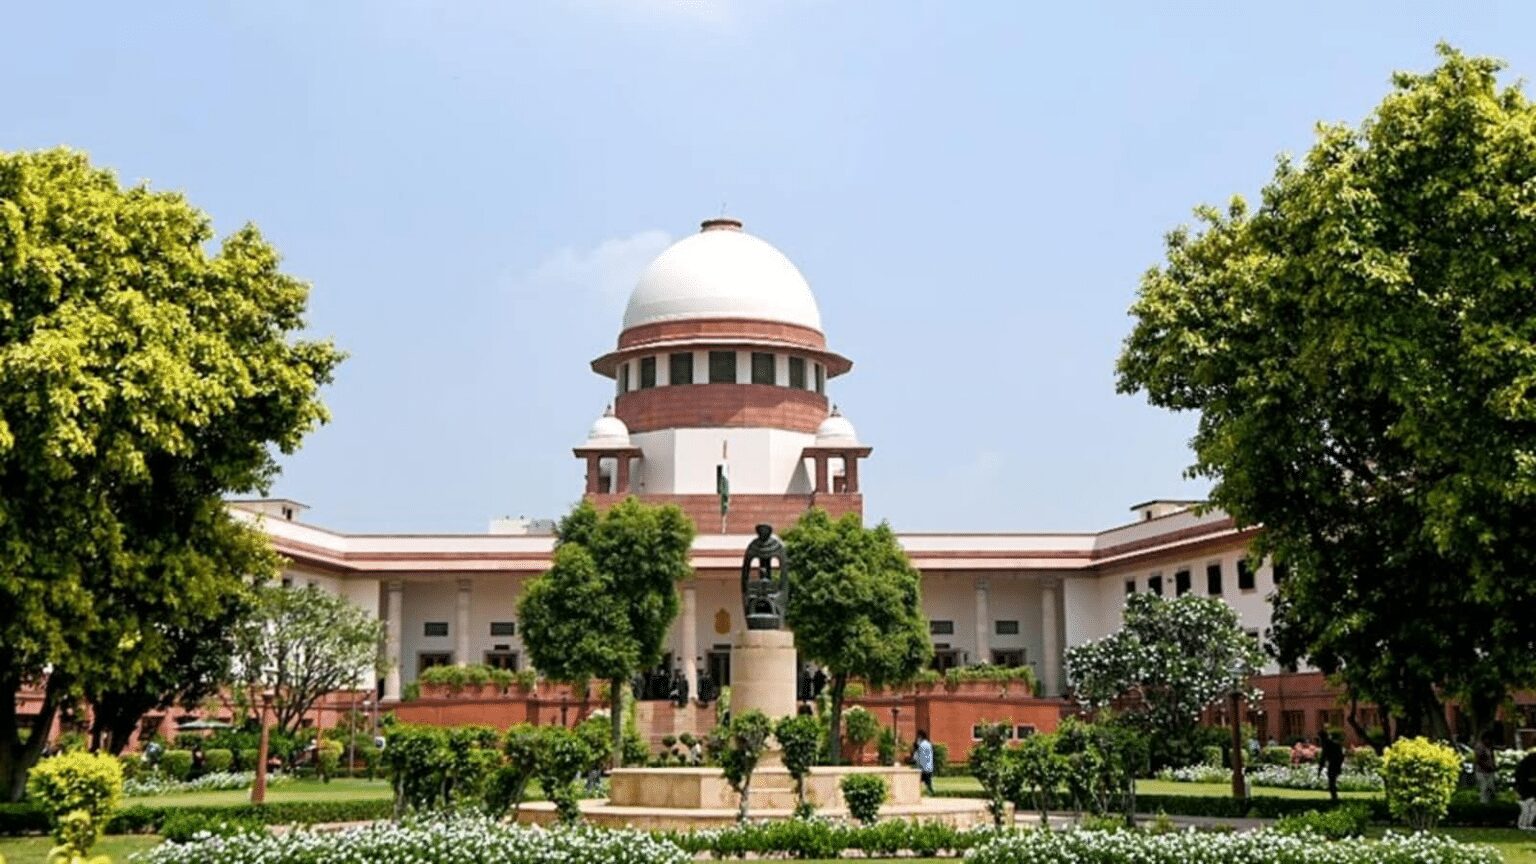 Preventive detention is a serious invasion of liberty says Supreme Court